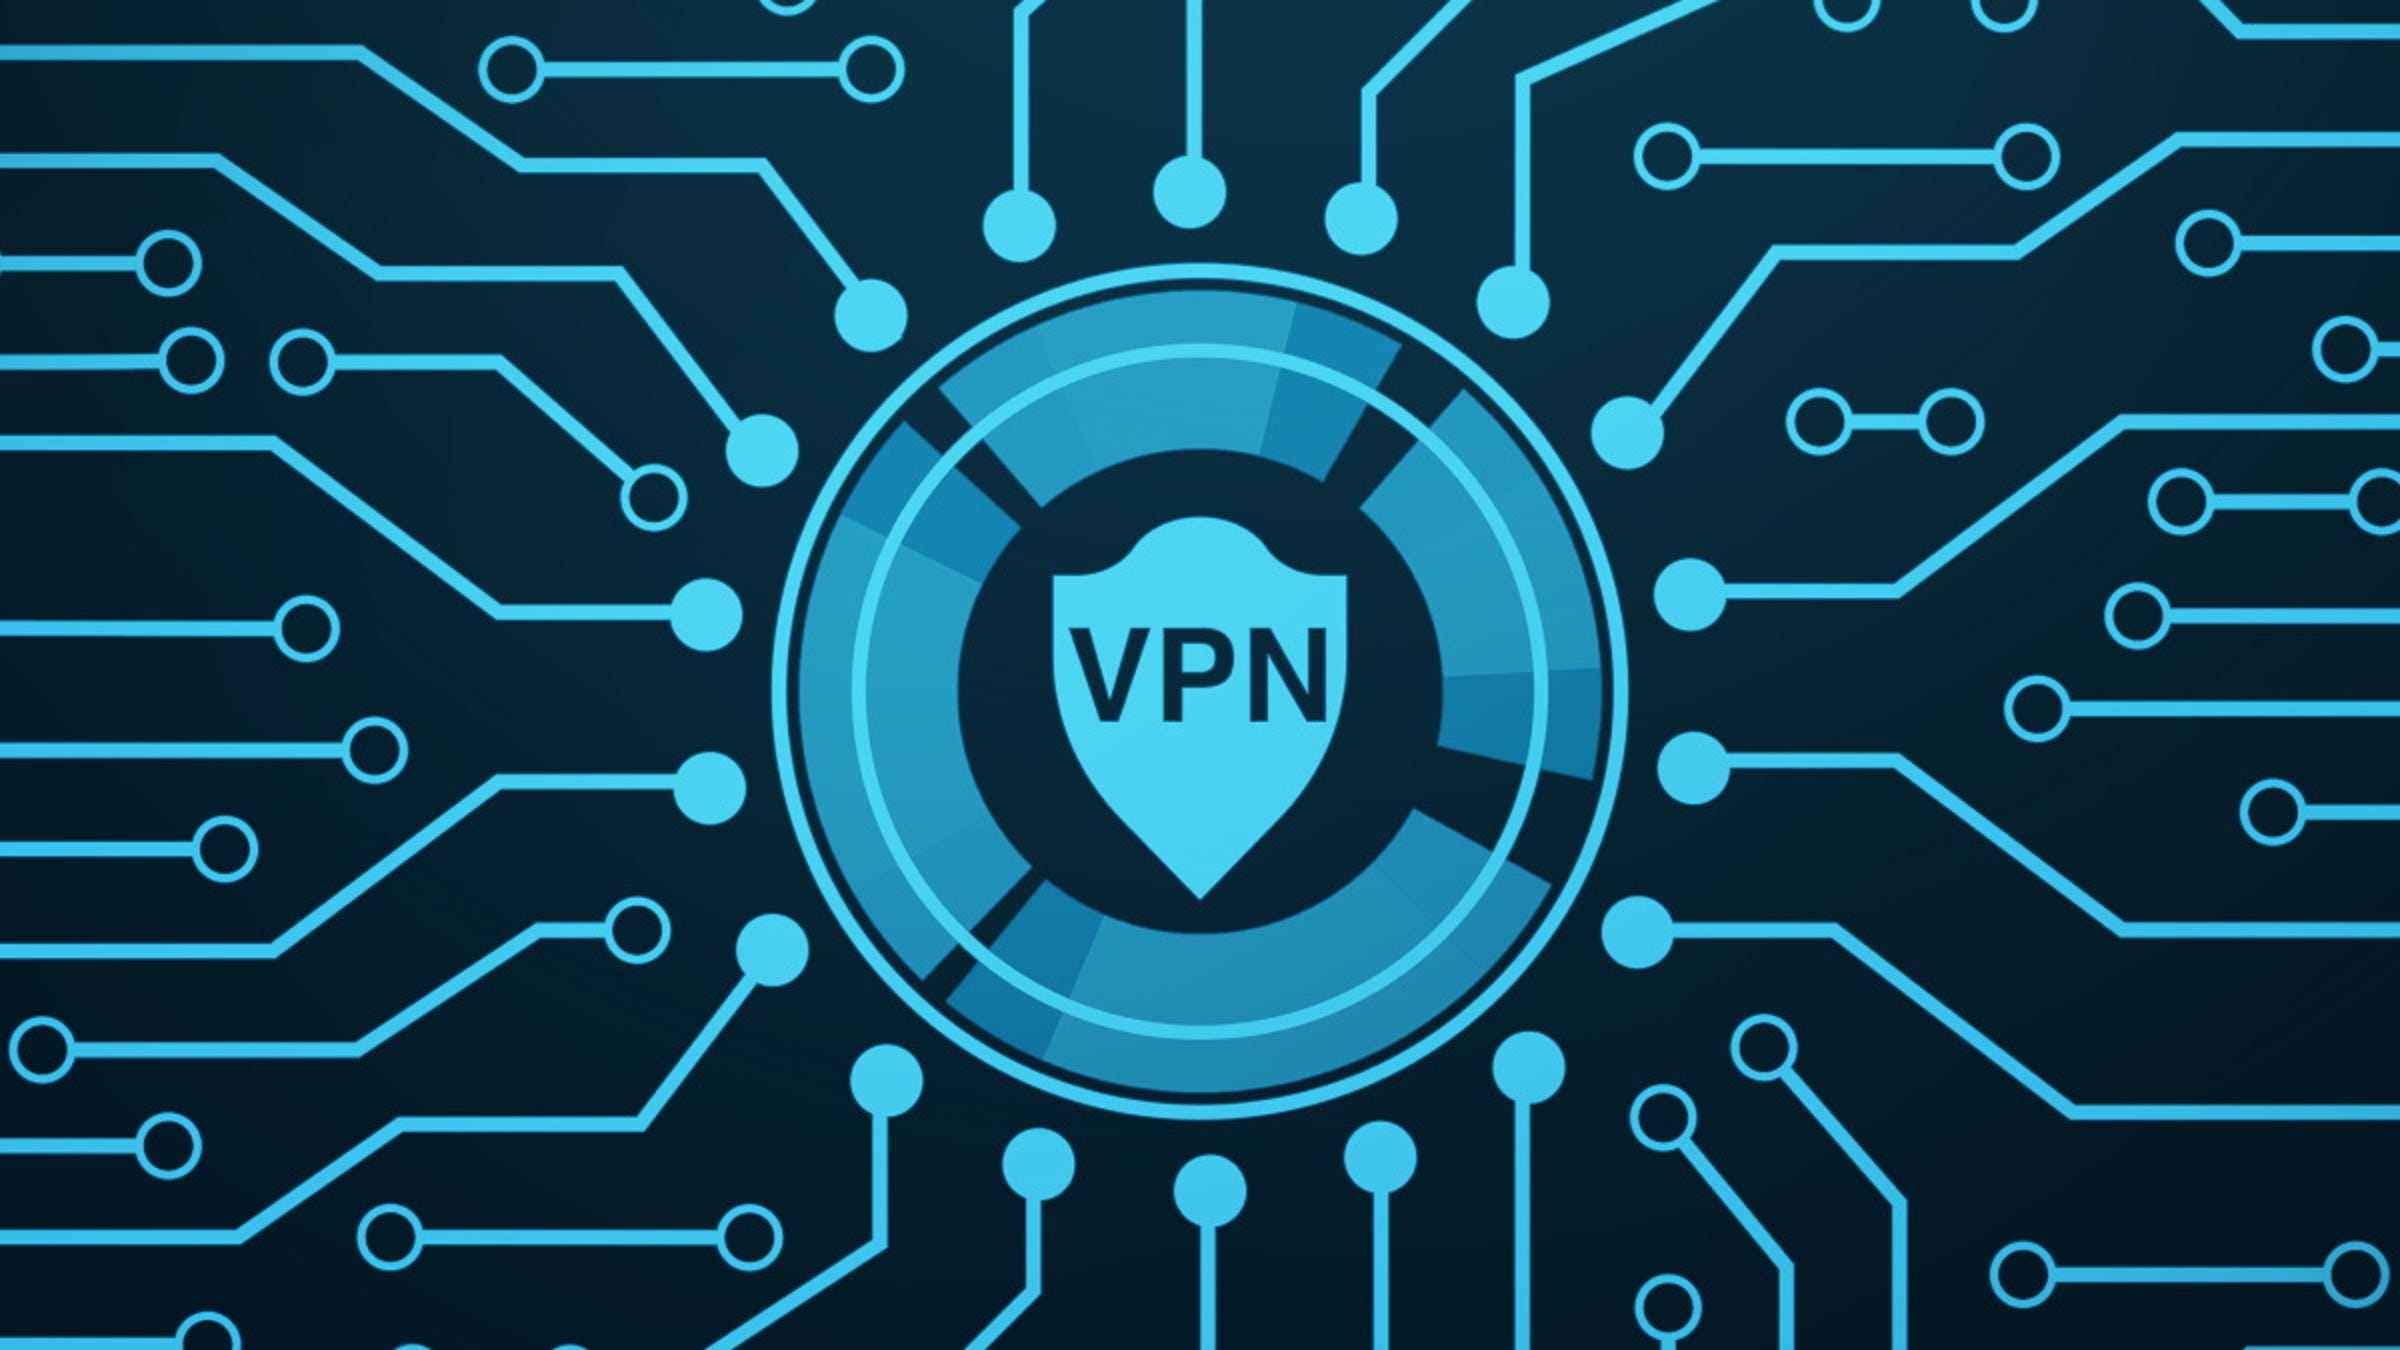 Free VPN vs. Paid VPN: Which Should You Choose?